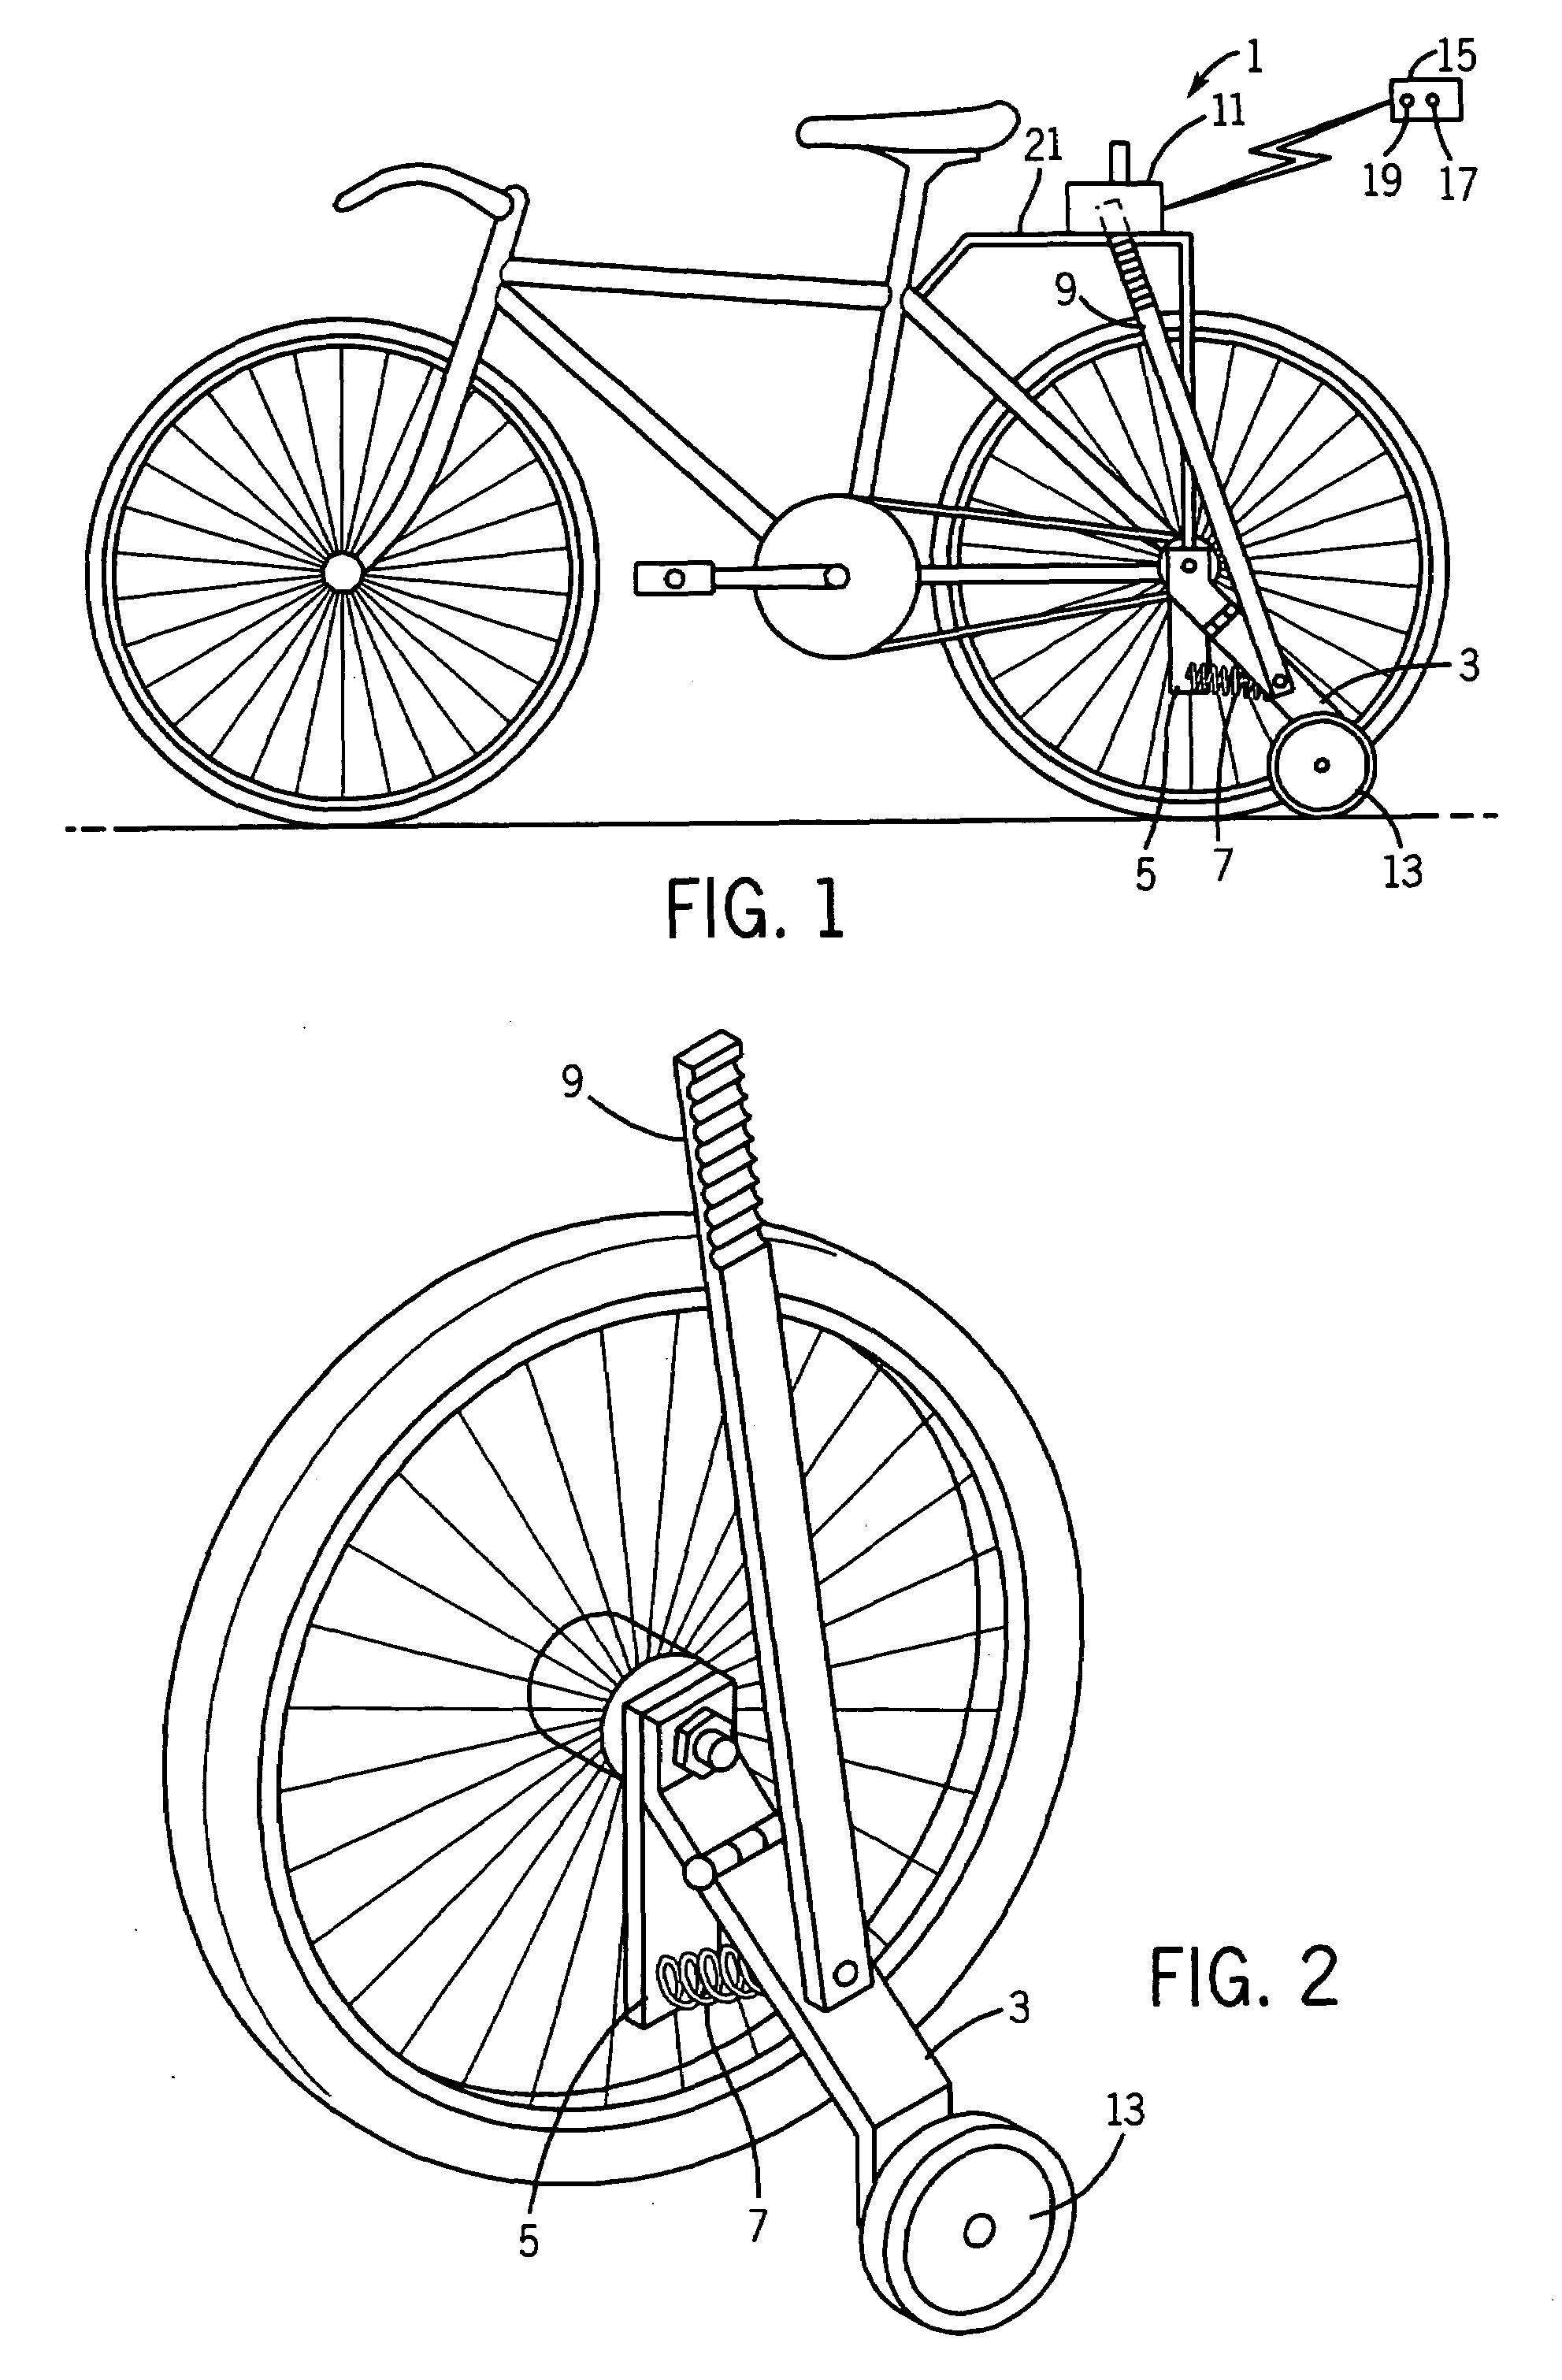 Bicycle training aid with dynamically deployable balancing features